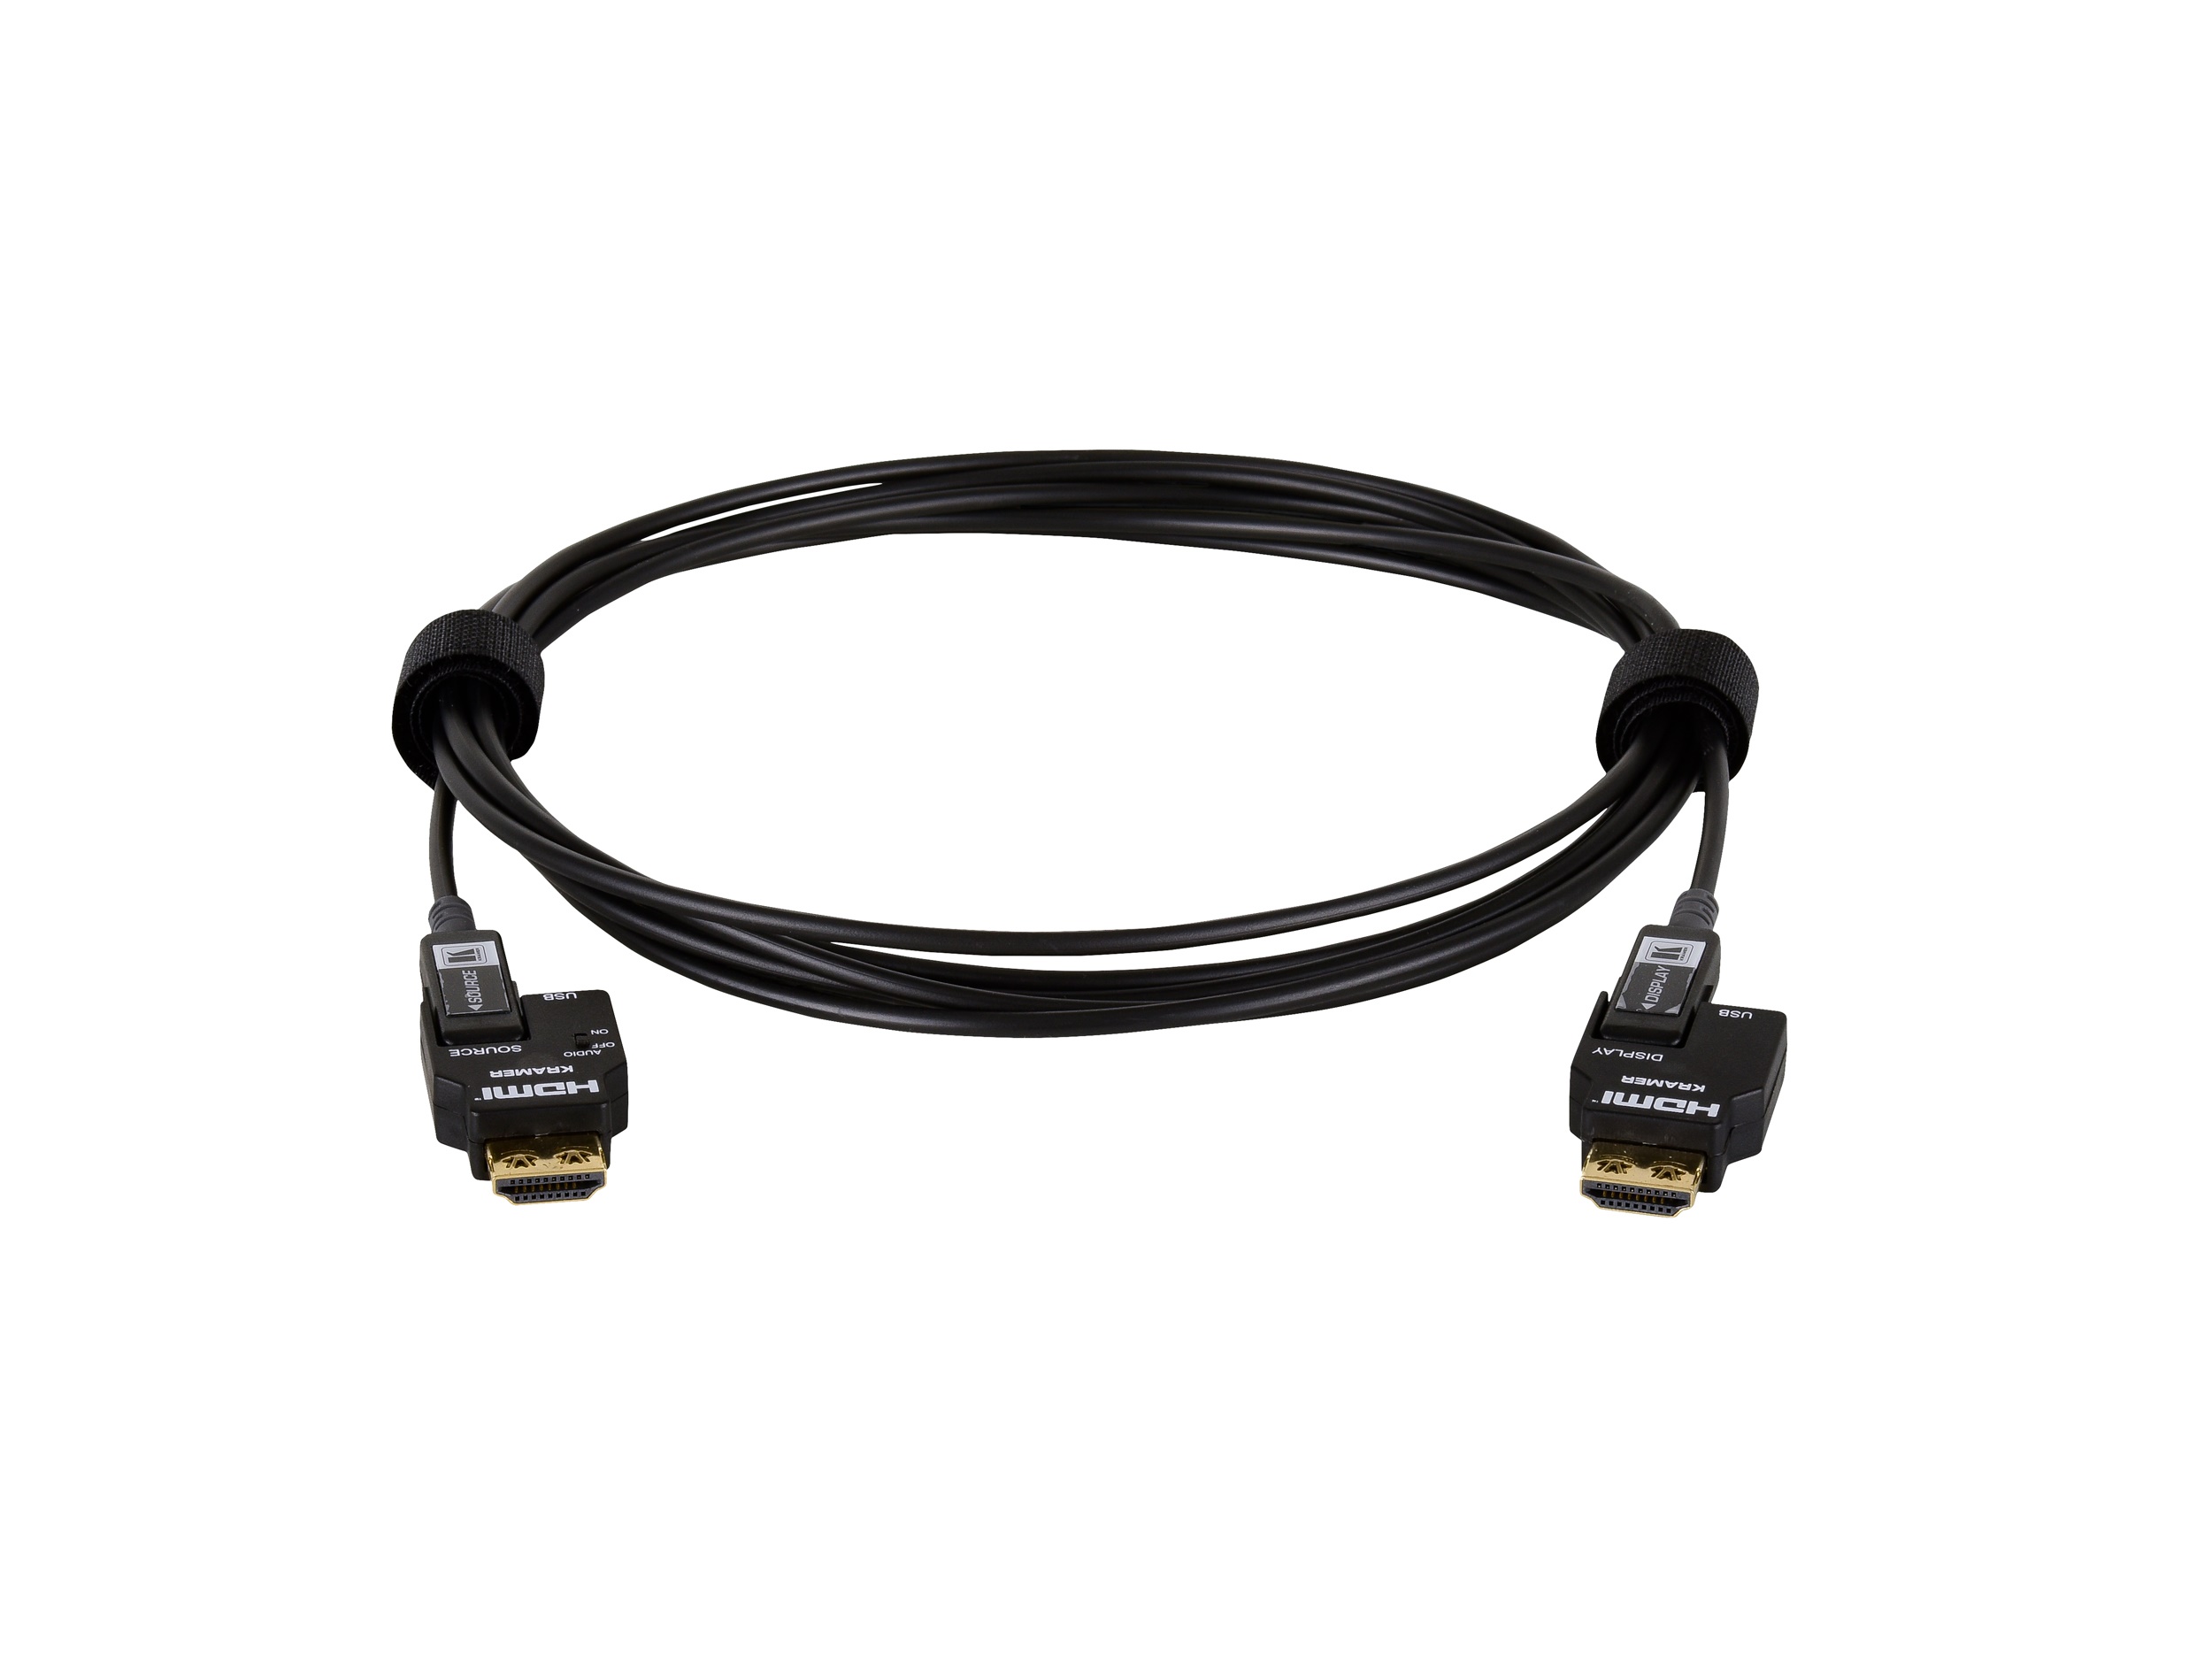 CRS-FIBERH-S1-164 50m/164ft 4K/60Hz (4x2x0) Secured Unidirectional 4K Pluggable HDMI Cable over Pure Fiber Cable by Kramer